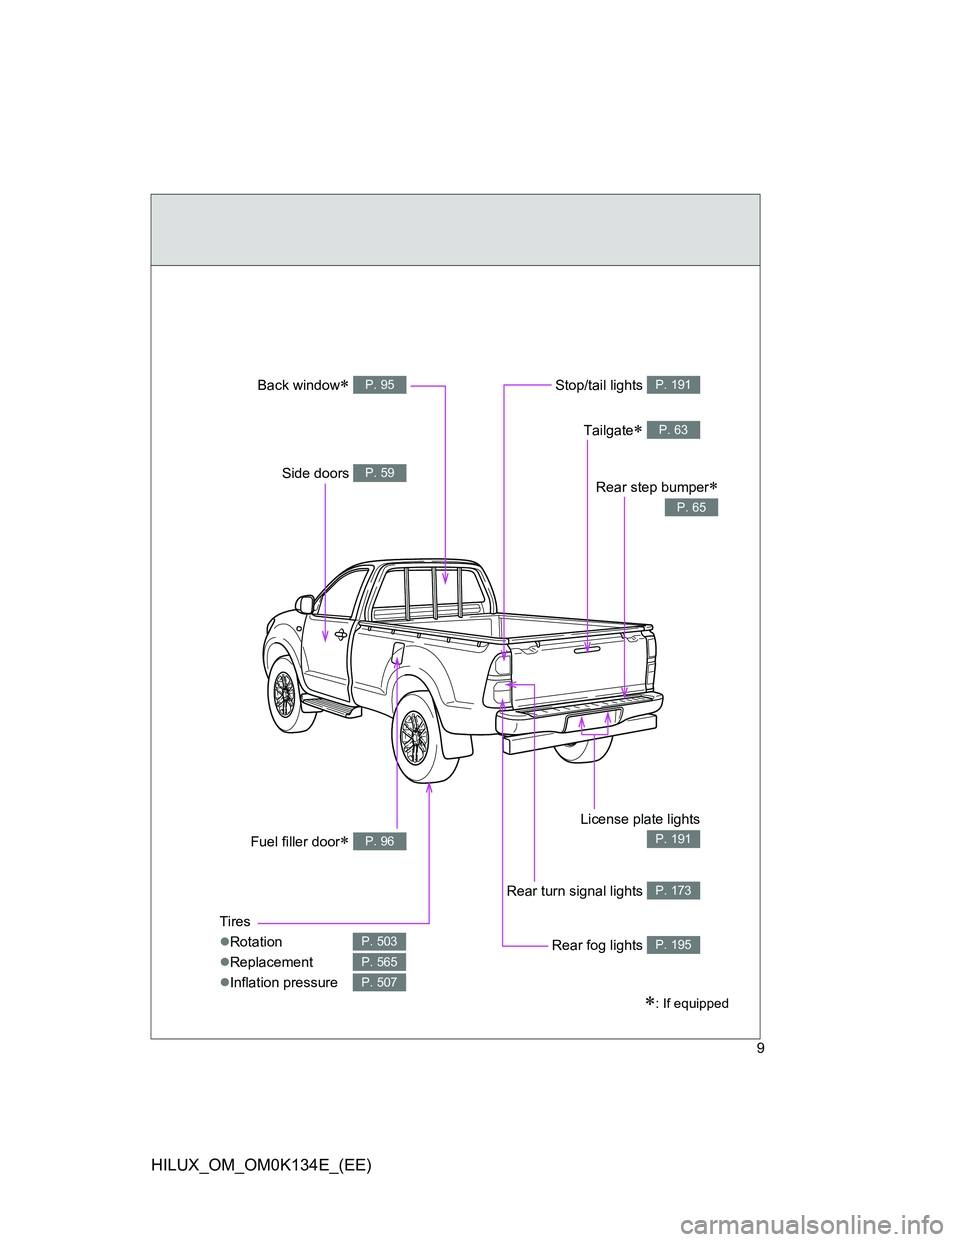 TOYOTA HILUX 2013  Owners Manual (in English) 9
HILUX_OM_OM0K134E_(EE)
: If equipped
Tires
Rotation
Replacement
Inflation pressure
P. 503
P. 565
P. 507
Fuel filler door P. 96
Rear fog lights P. 195
Rear turn signal lights P. 173
Li